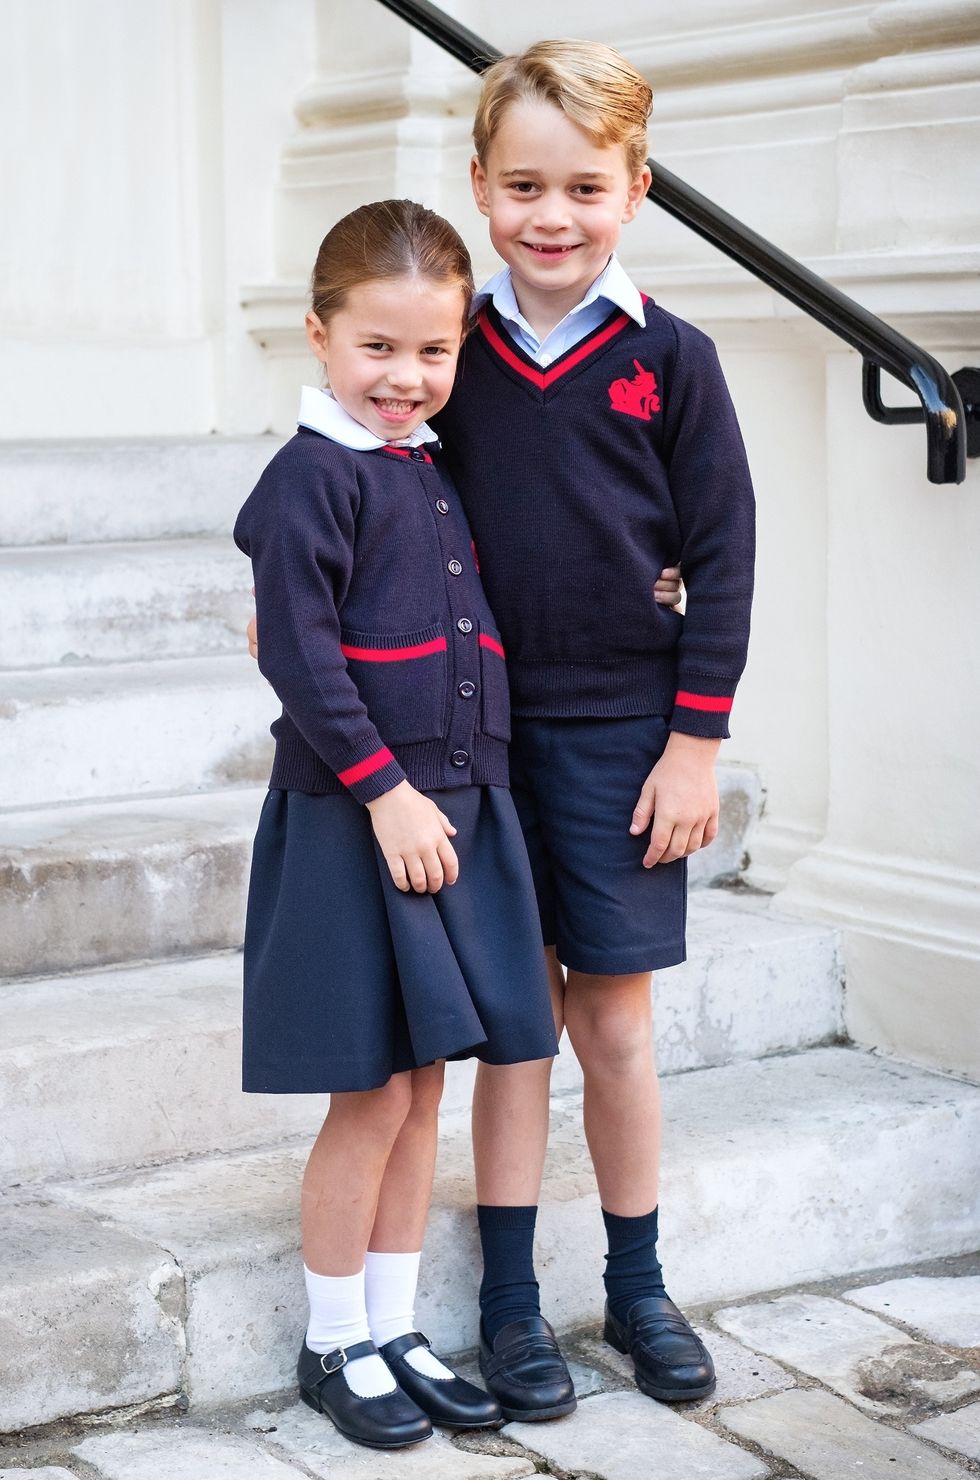 a boy and girl in school uniforms